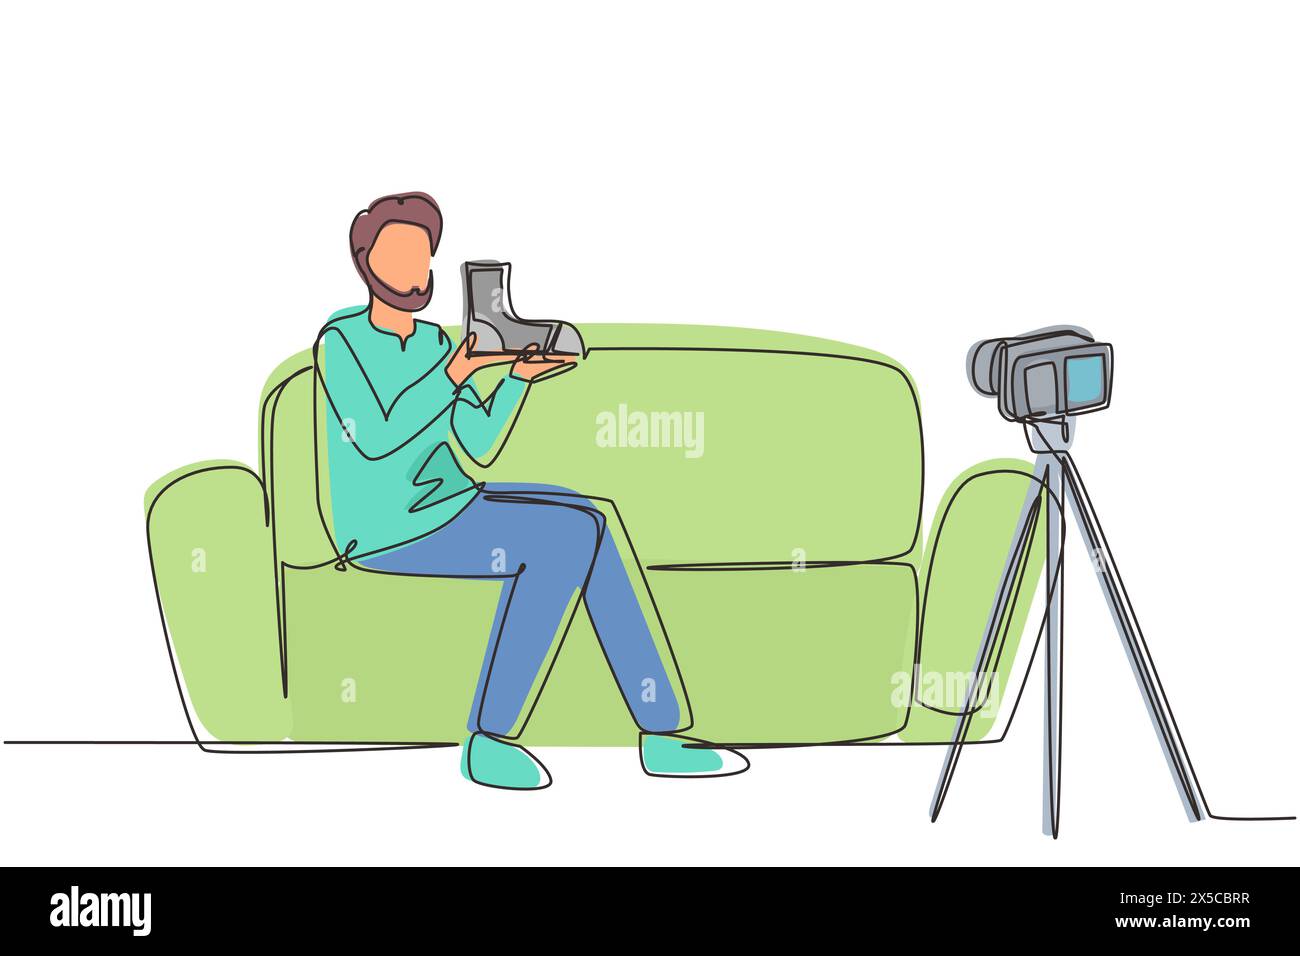 Single continuous line drawing social media influencer reviewing boots. Smiling young Arab man vlogging about men's sports shoe and filming himself at Stock Vector